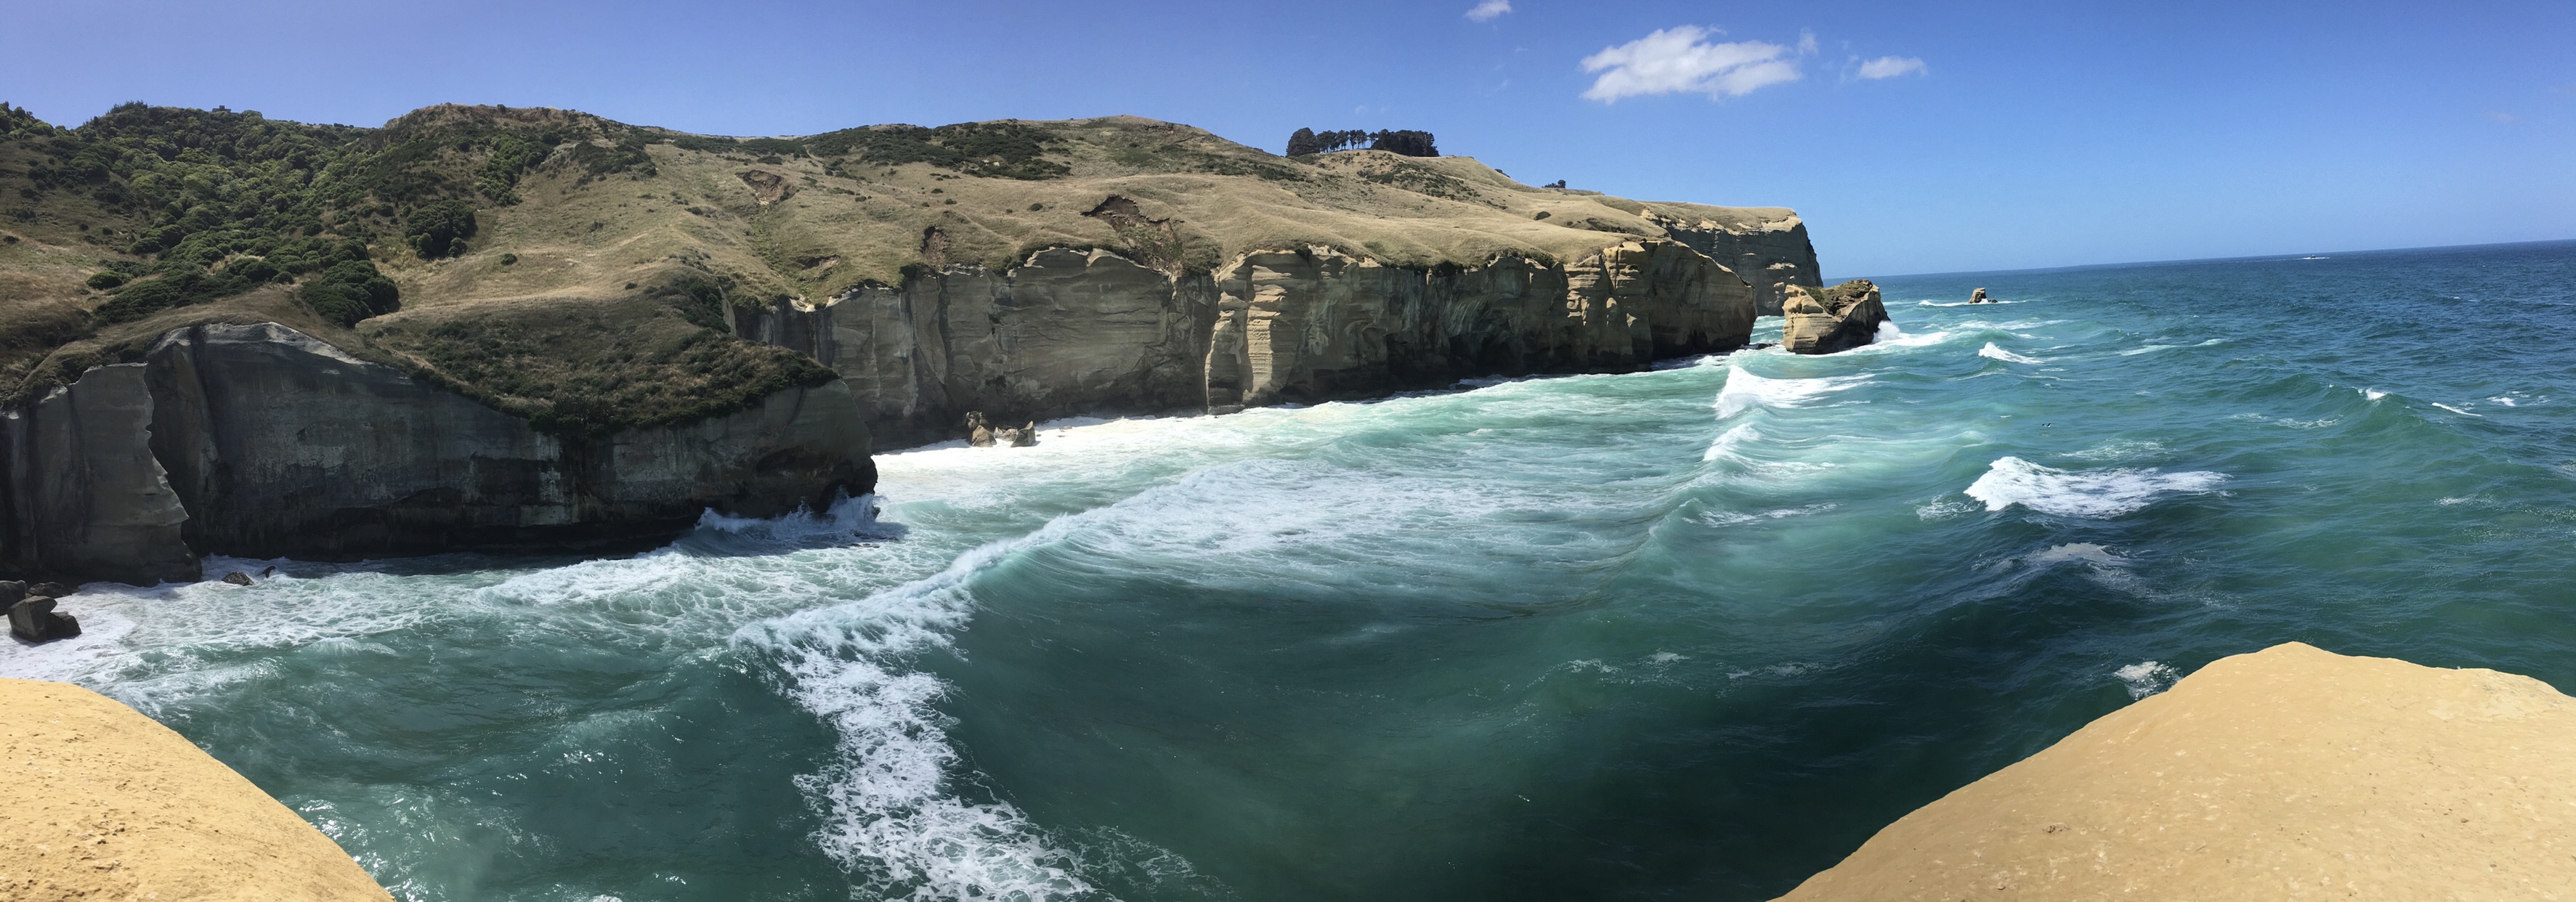 A Day Trip to Tunnel Beach in Dunedin, New Zealand